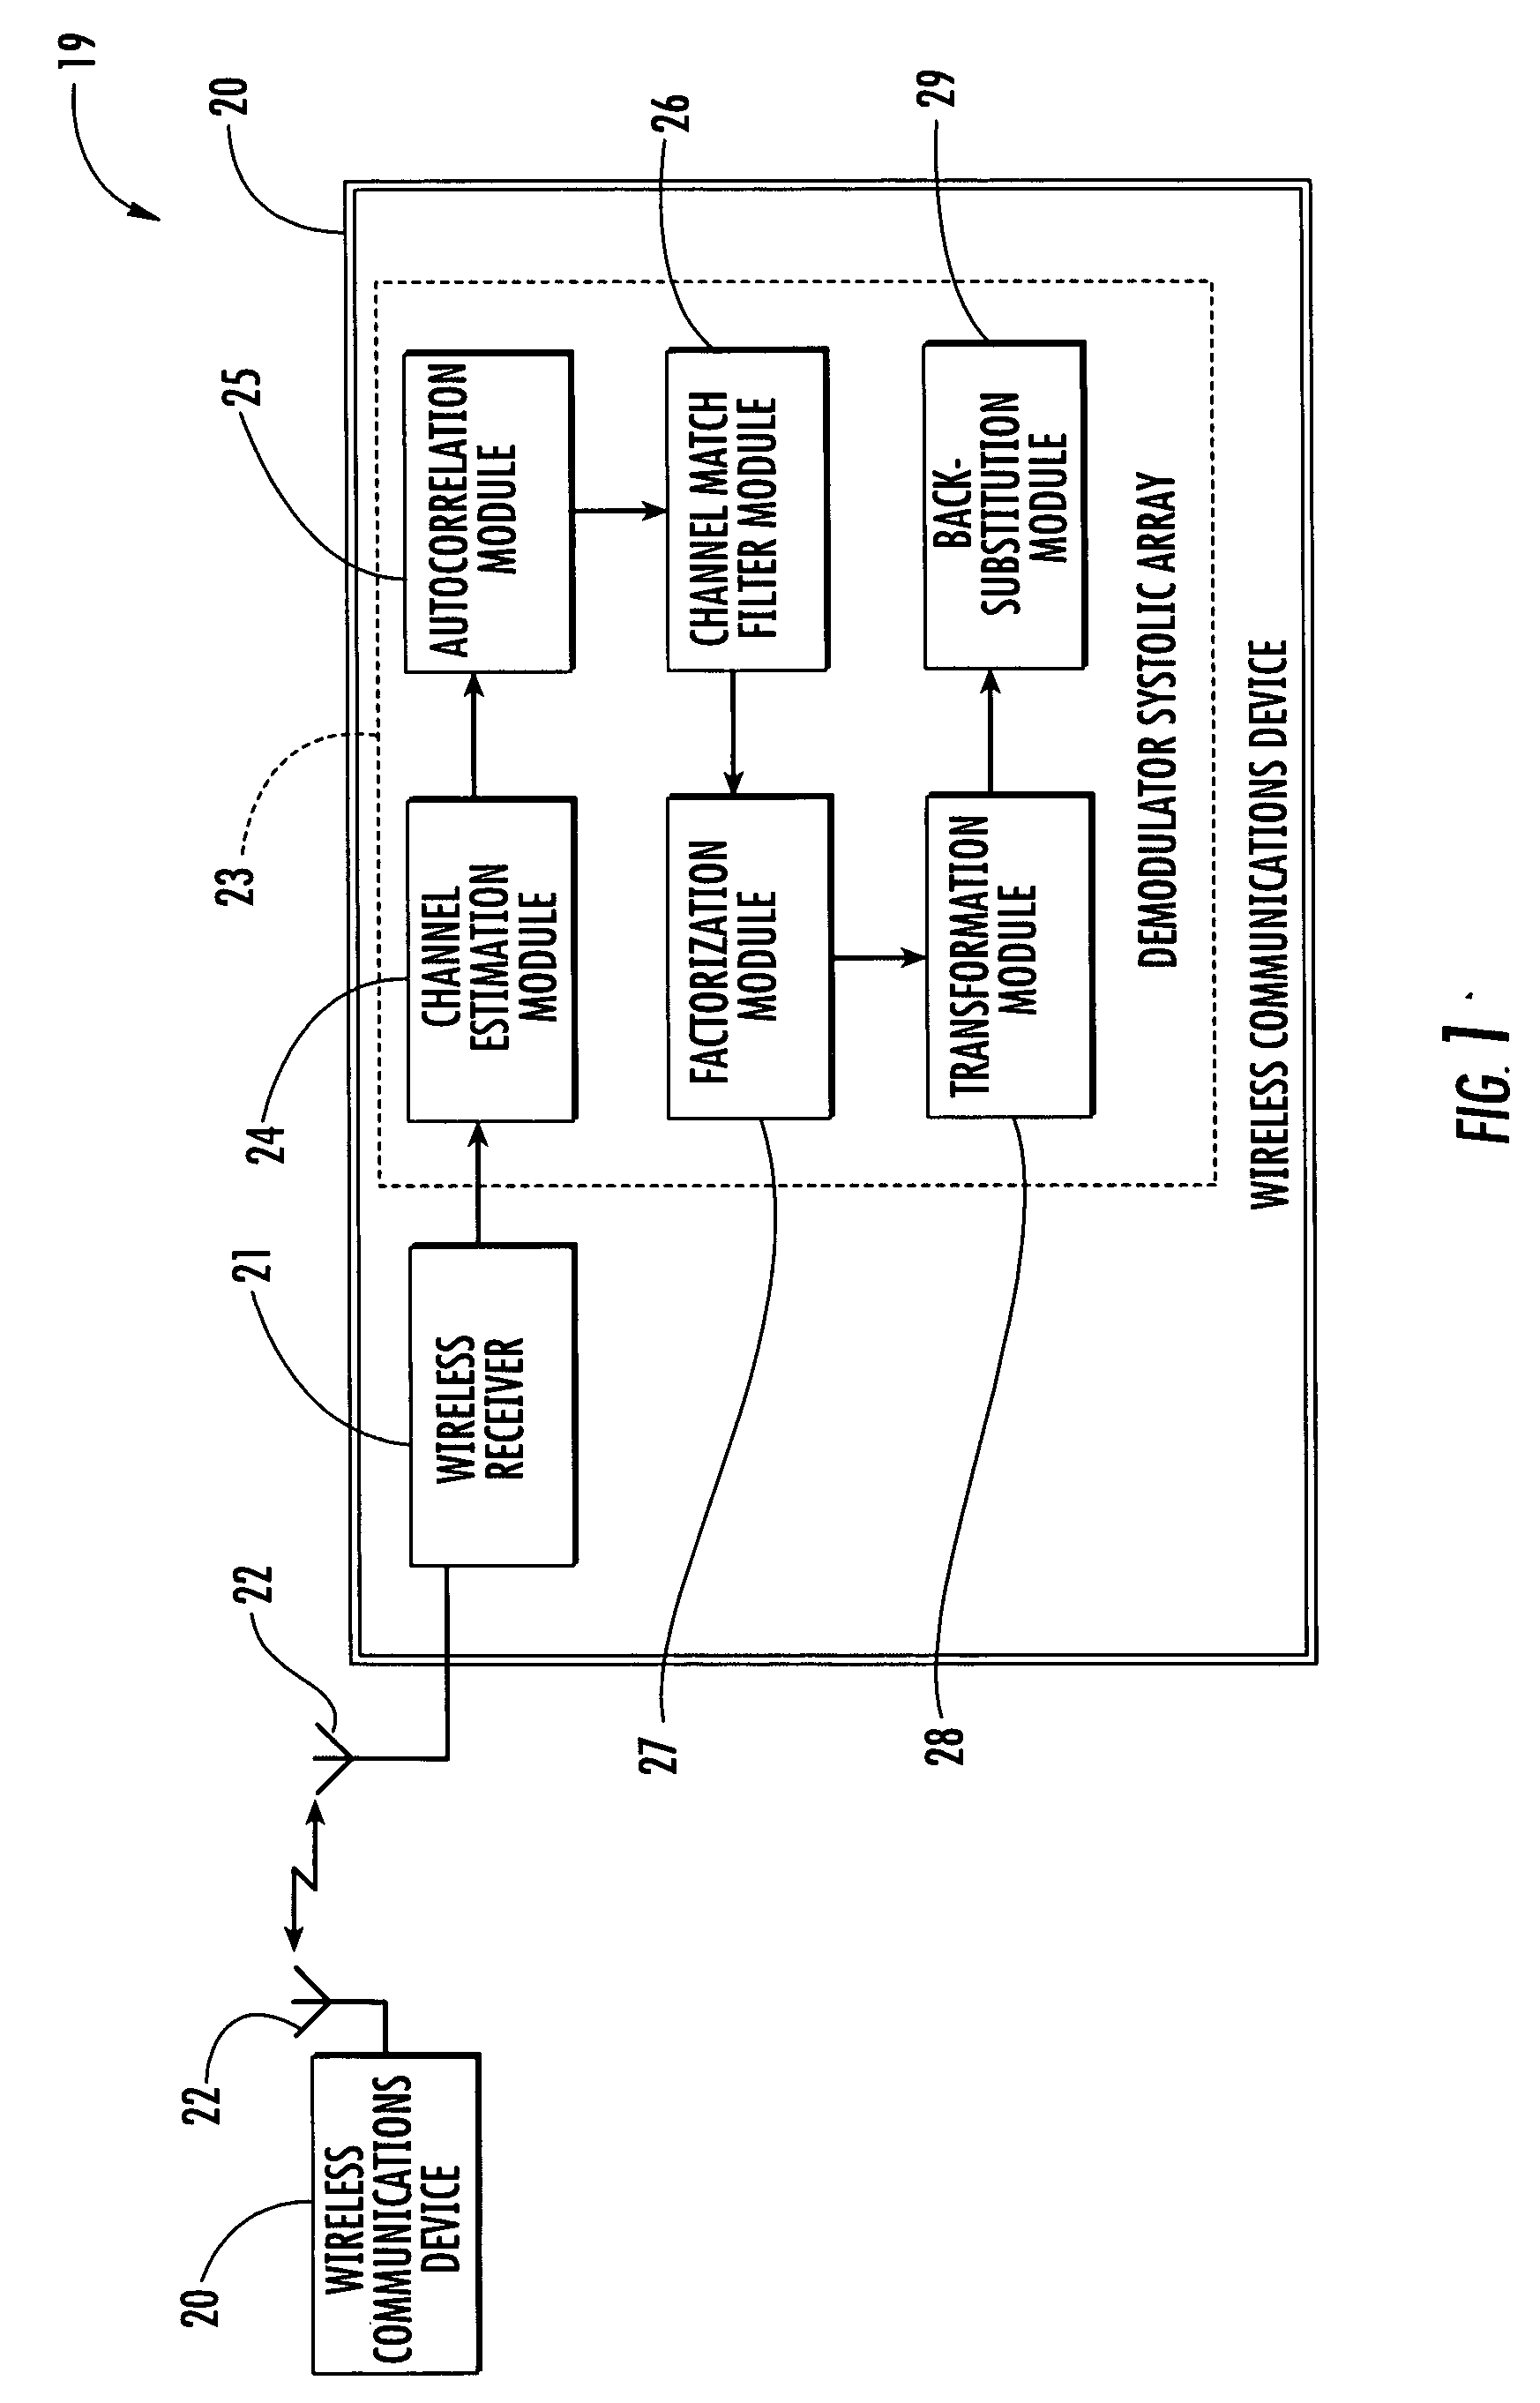 Wireless communications device performing block equalization based upon prior, current and/or future autocorrelation matrix estimates and related methods